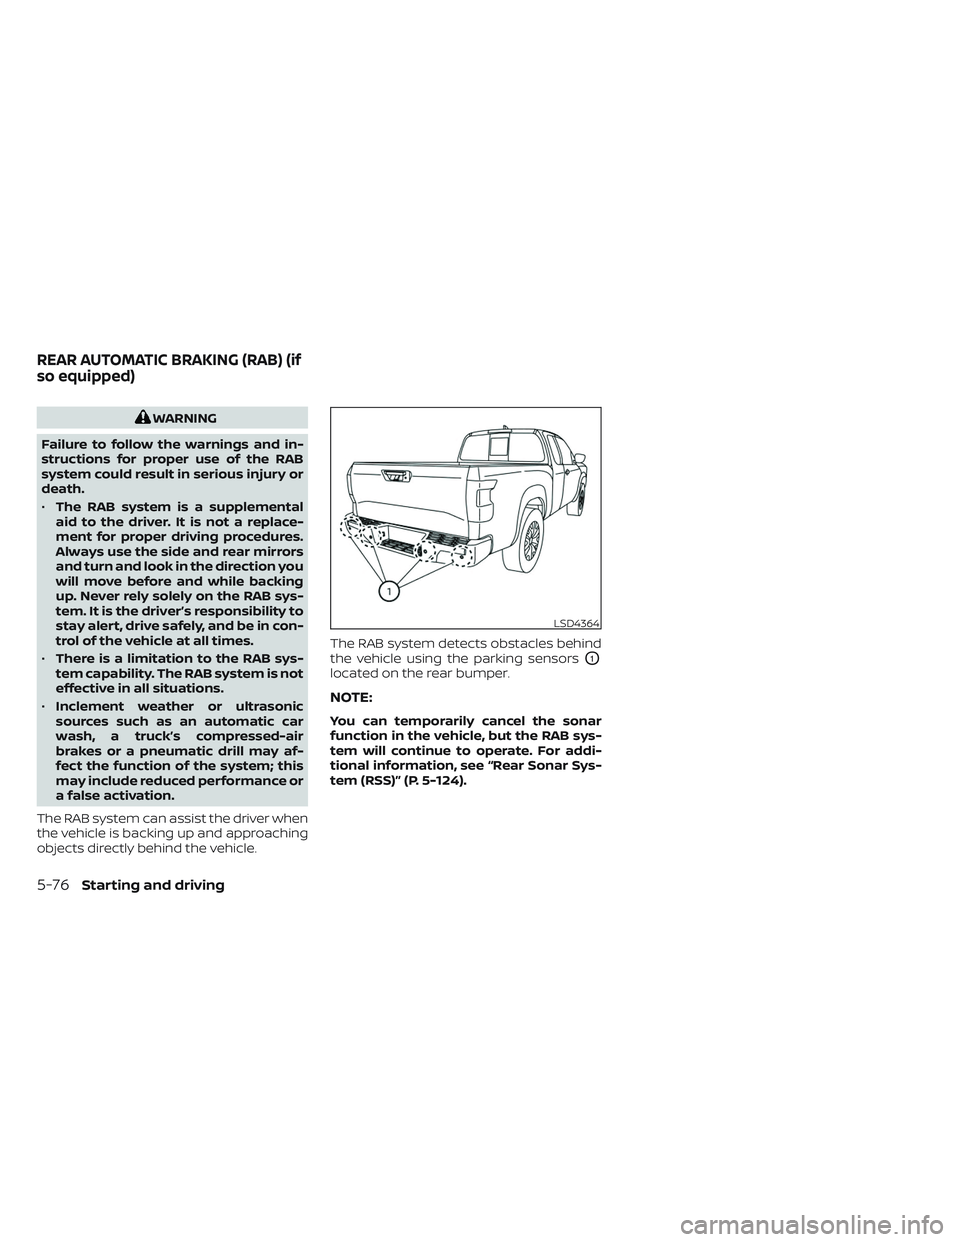 NISSAN FRONTIER 2023  Owners Manual WARNING
Failure to follow the warnings and in-
structions for proper use of the RAB
system could result in serious injury or
death.
• The RAB system is a supplemental
aid to the driver. It is not a 